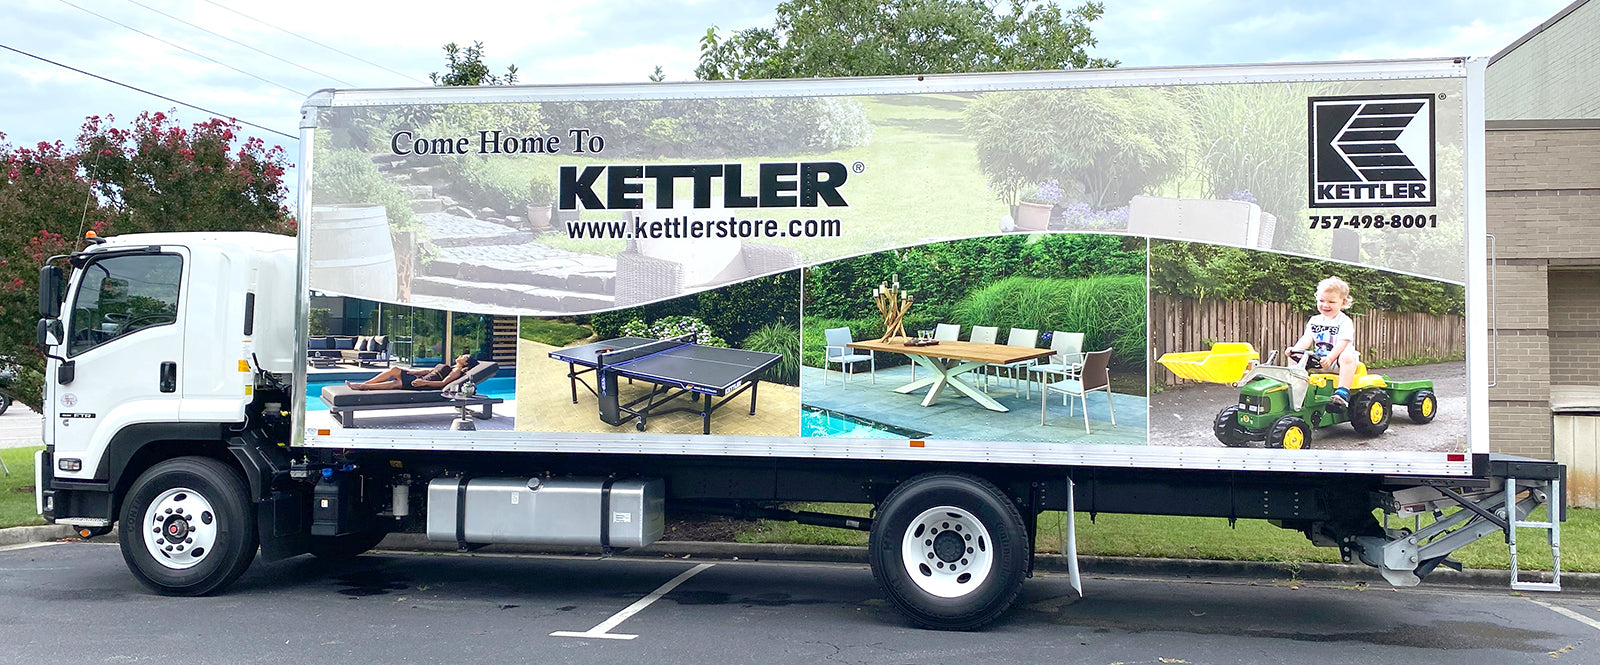 Side view of the Kettler Store delivery truck.